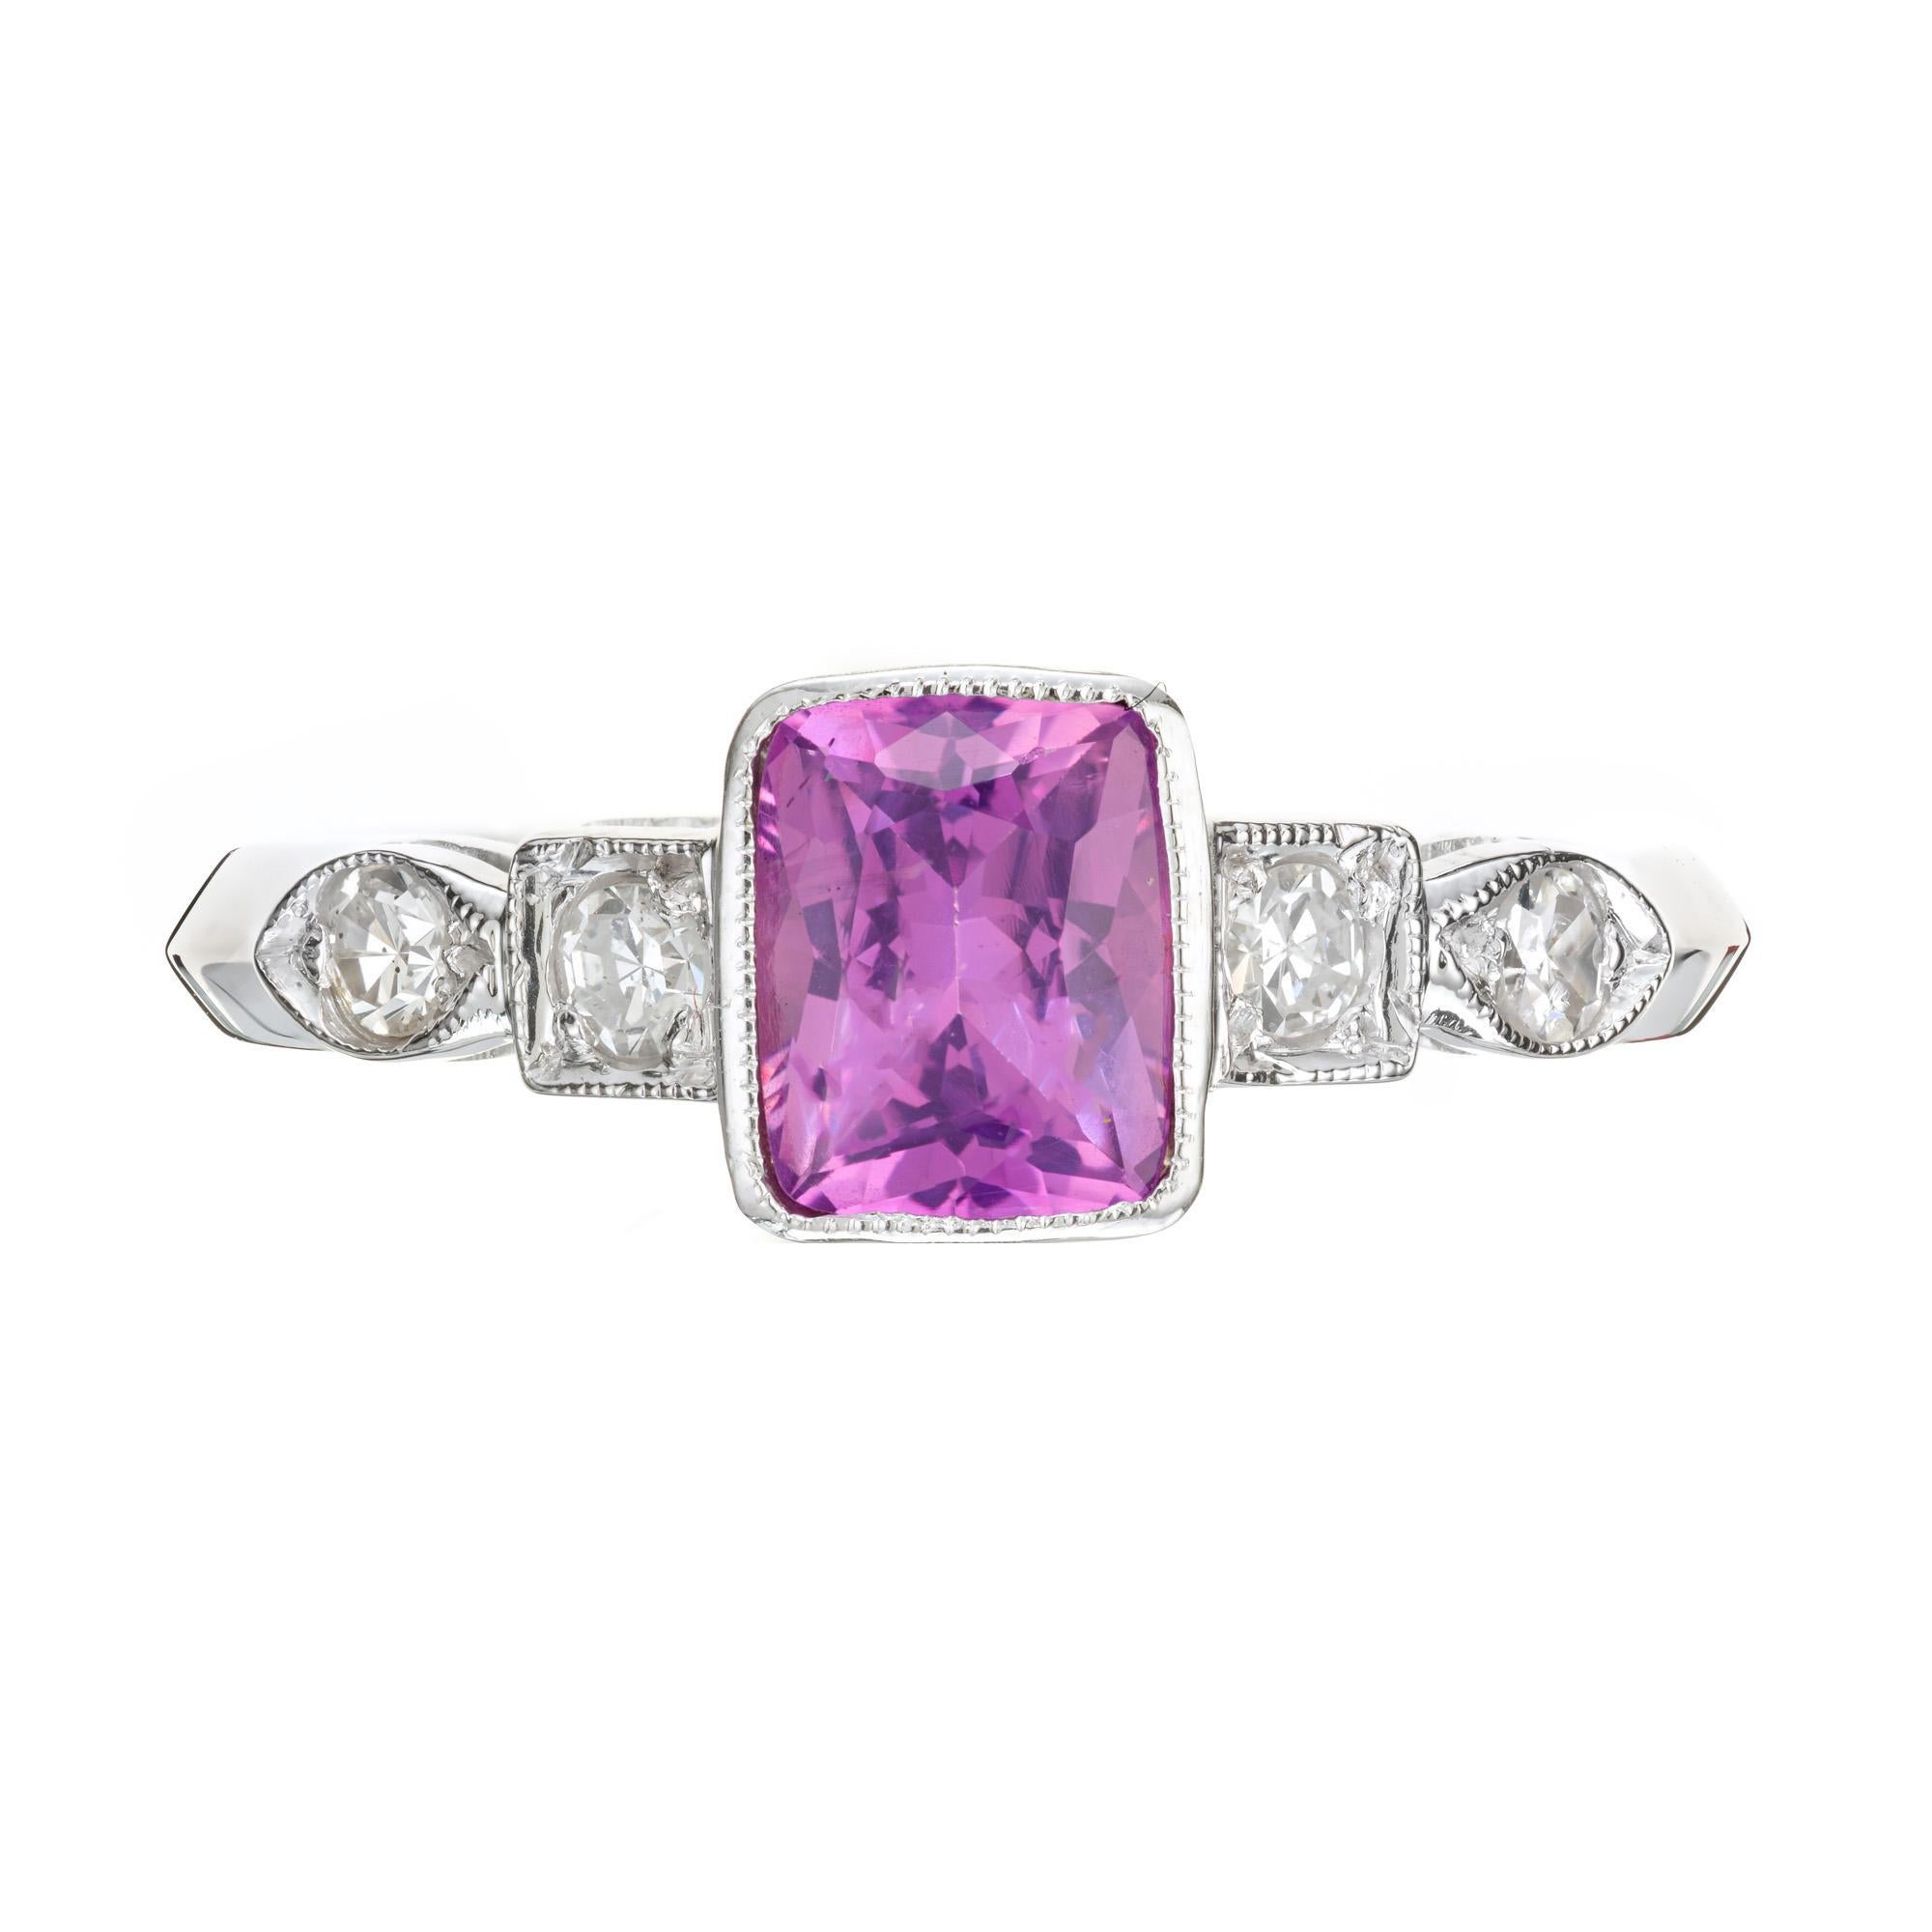 1920's Art Deco sapphire and diamond engagement ring. GIA Pink cushion cut sapphire center stone in a Milgrain platinum setting with 2 single cut diamonds on each side. The sapphire is natural and untreated. 

1 cushion cut pink purple Sapphire,